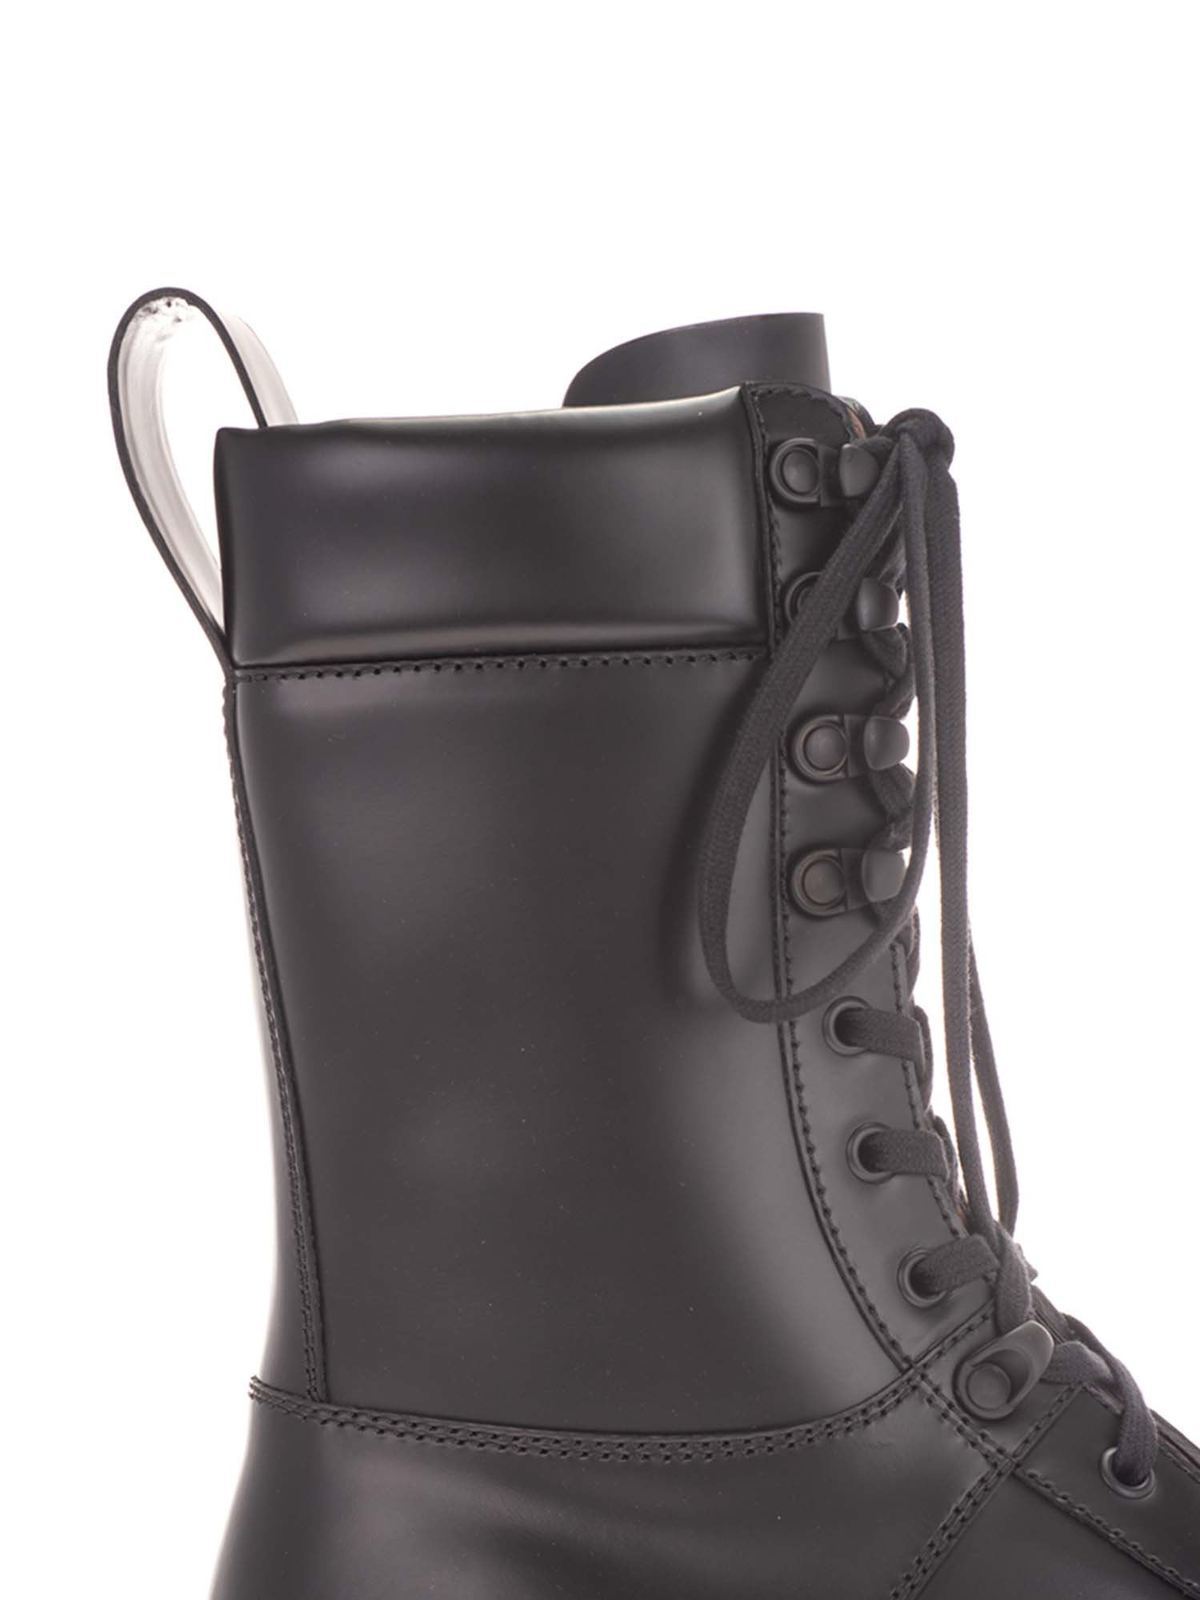 Bottega Veneta - The Bounce ankle boots in black - ankle boots ...